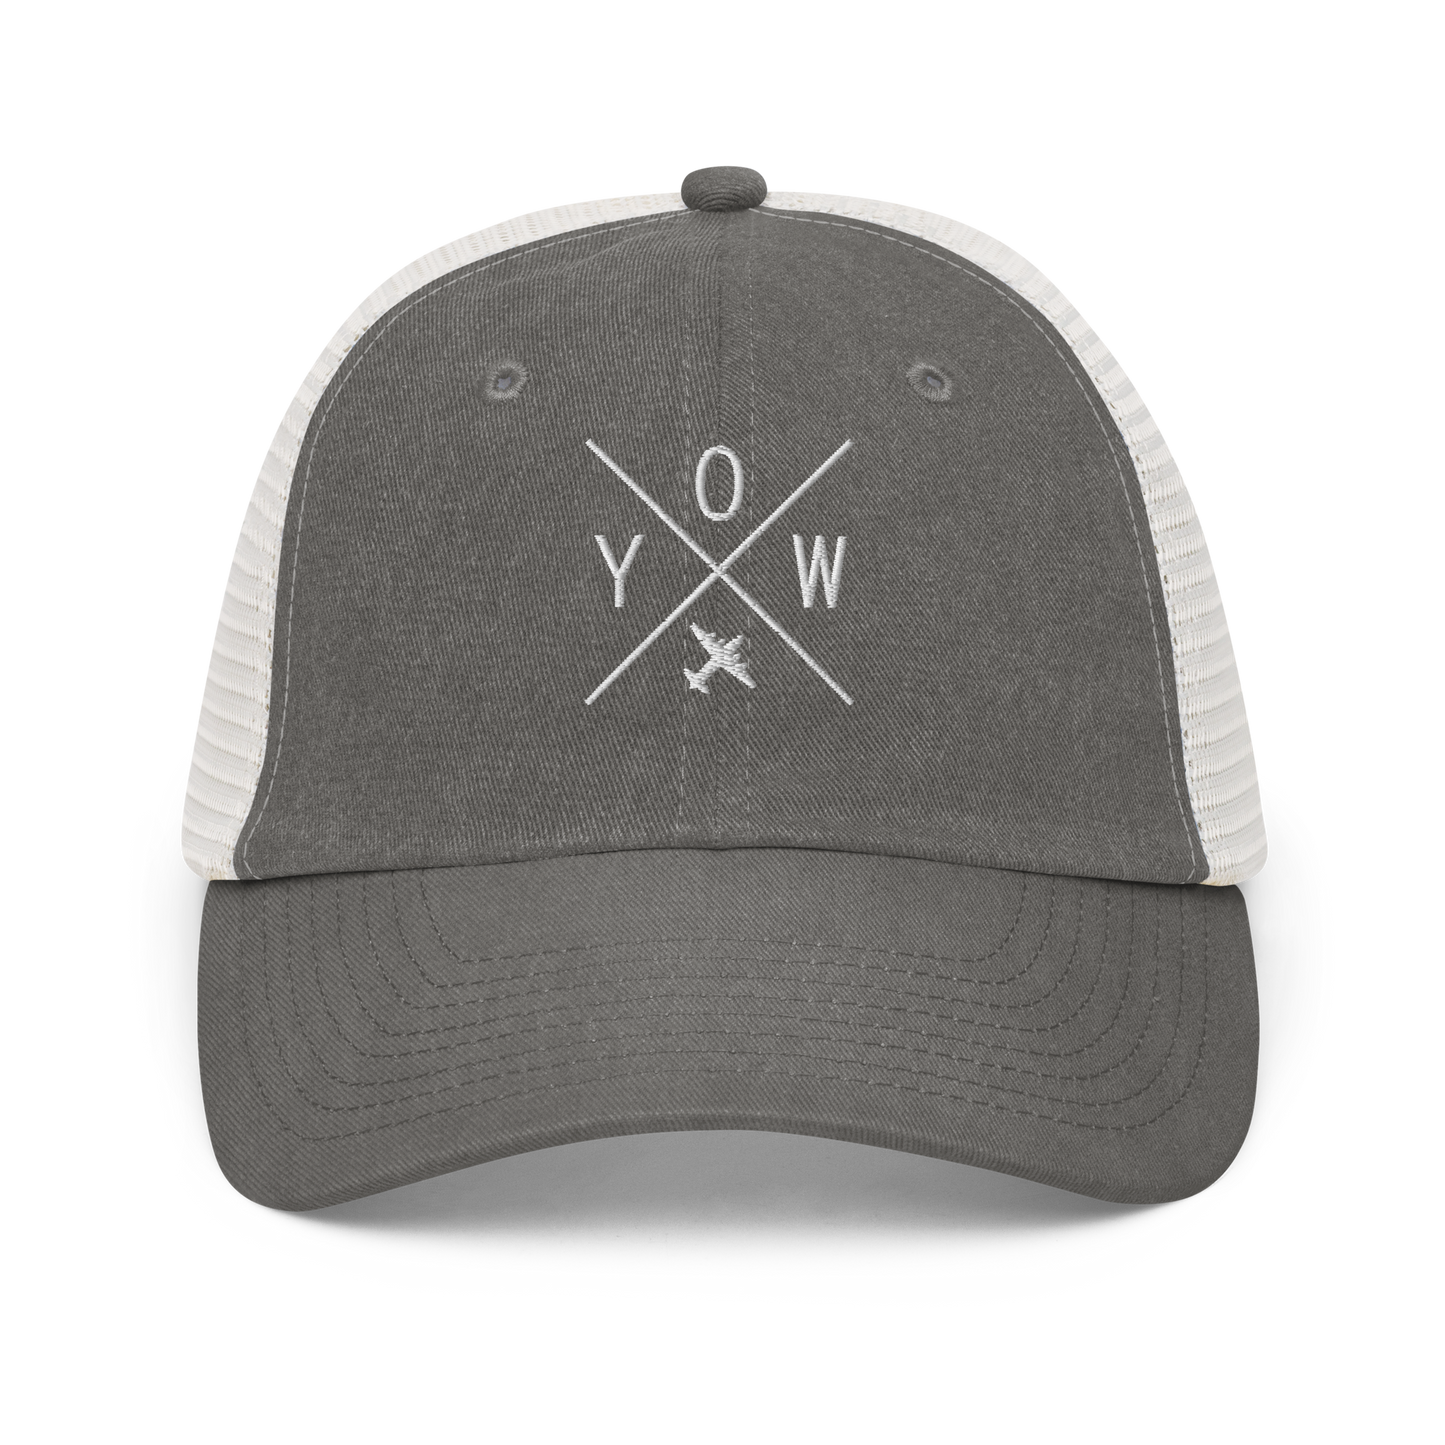 YHM Designs - YOW Ottawa Pigment-Dyed Trucker Cap - Crossed-X Design with Airport Code and Vintage Propliner - White Embroidery - Image 09